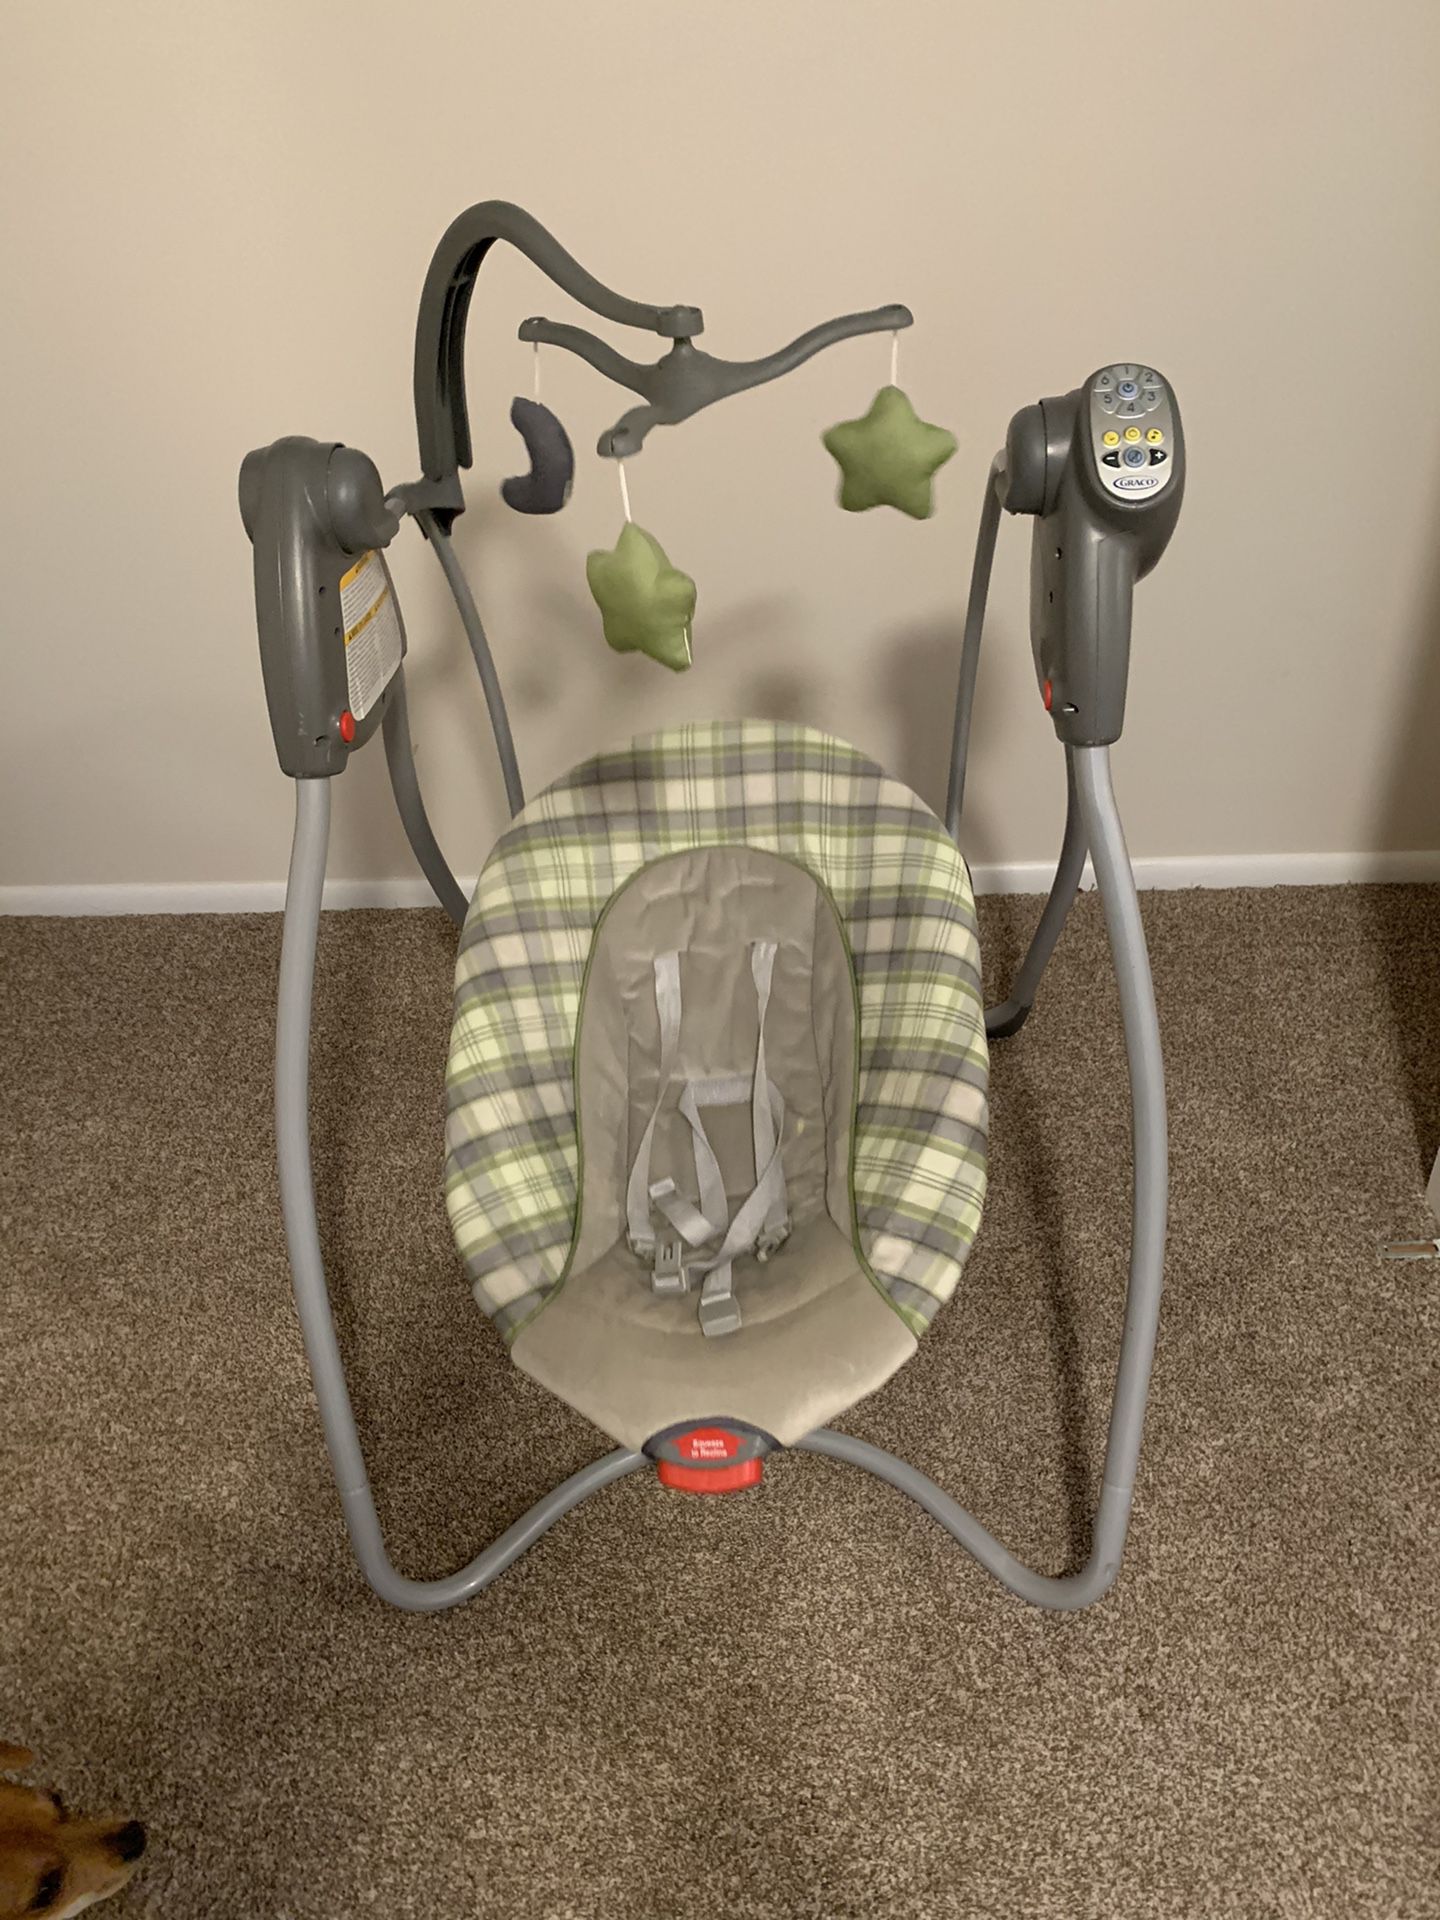 Graco foldable baby swing